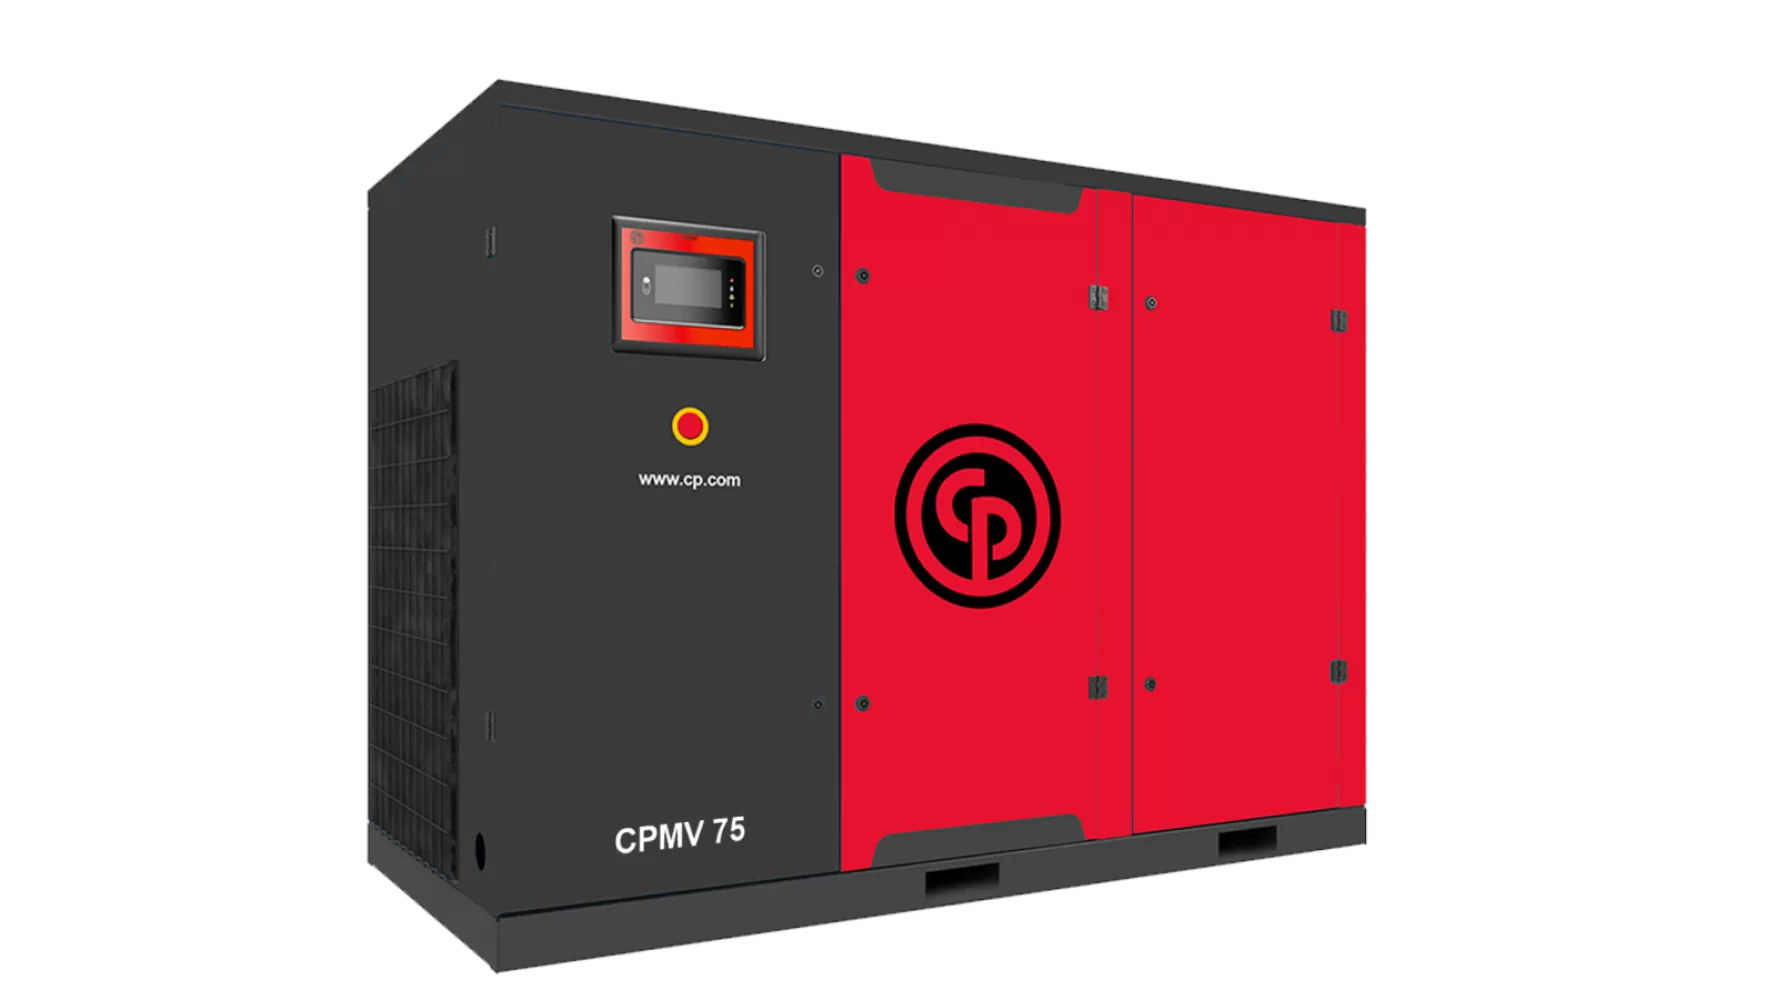 75.0HP “CP” CHICAGO PNEUMATIC VARIABLE SPEED SCREW AIR COMPRESSOR